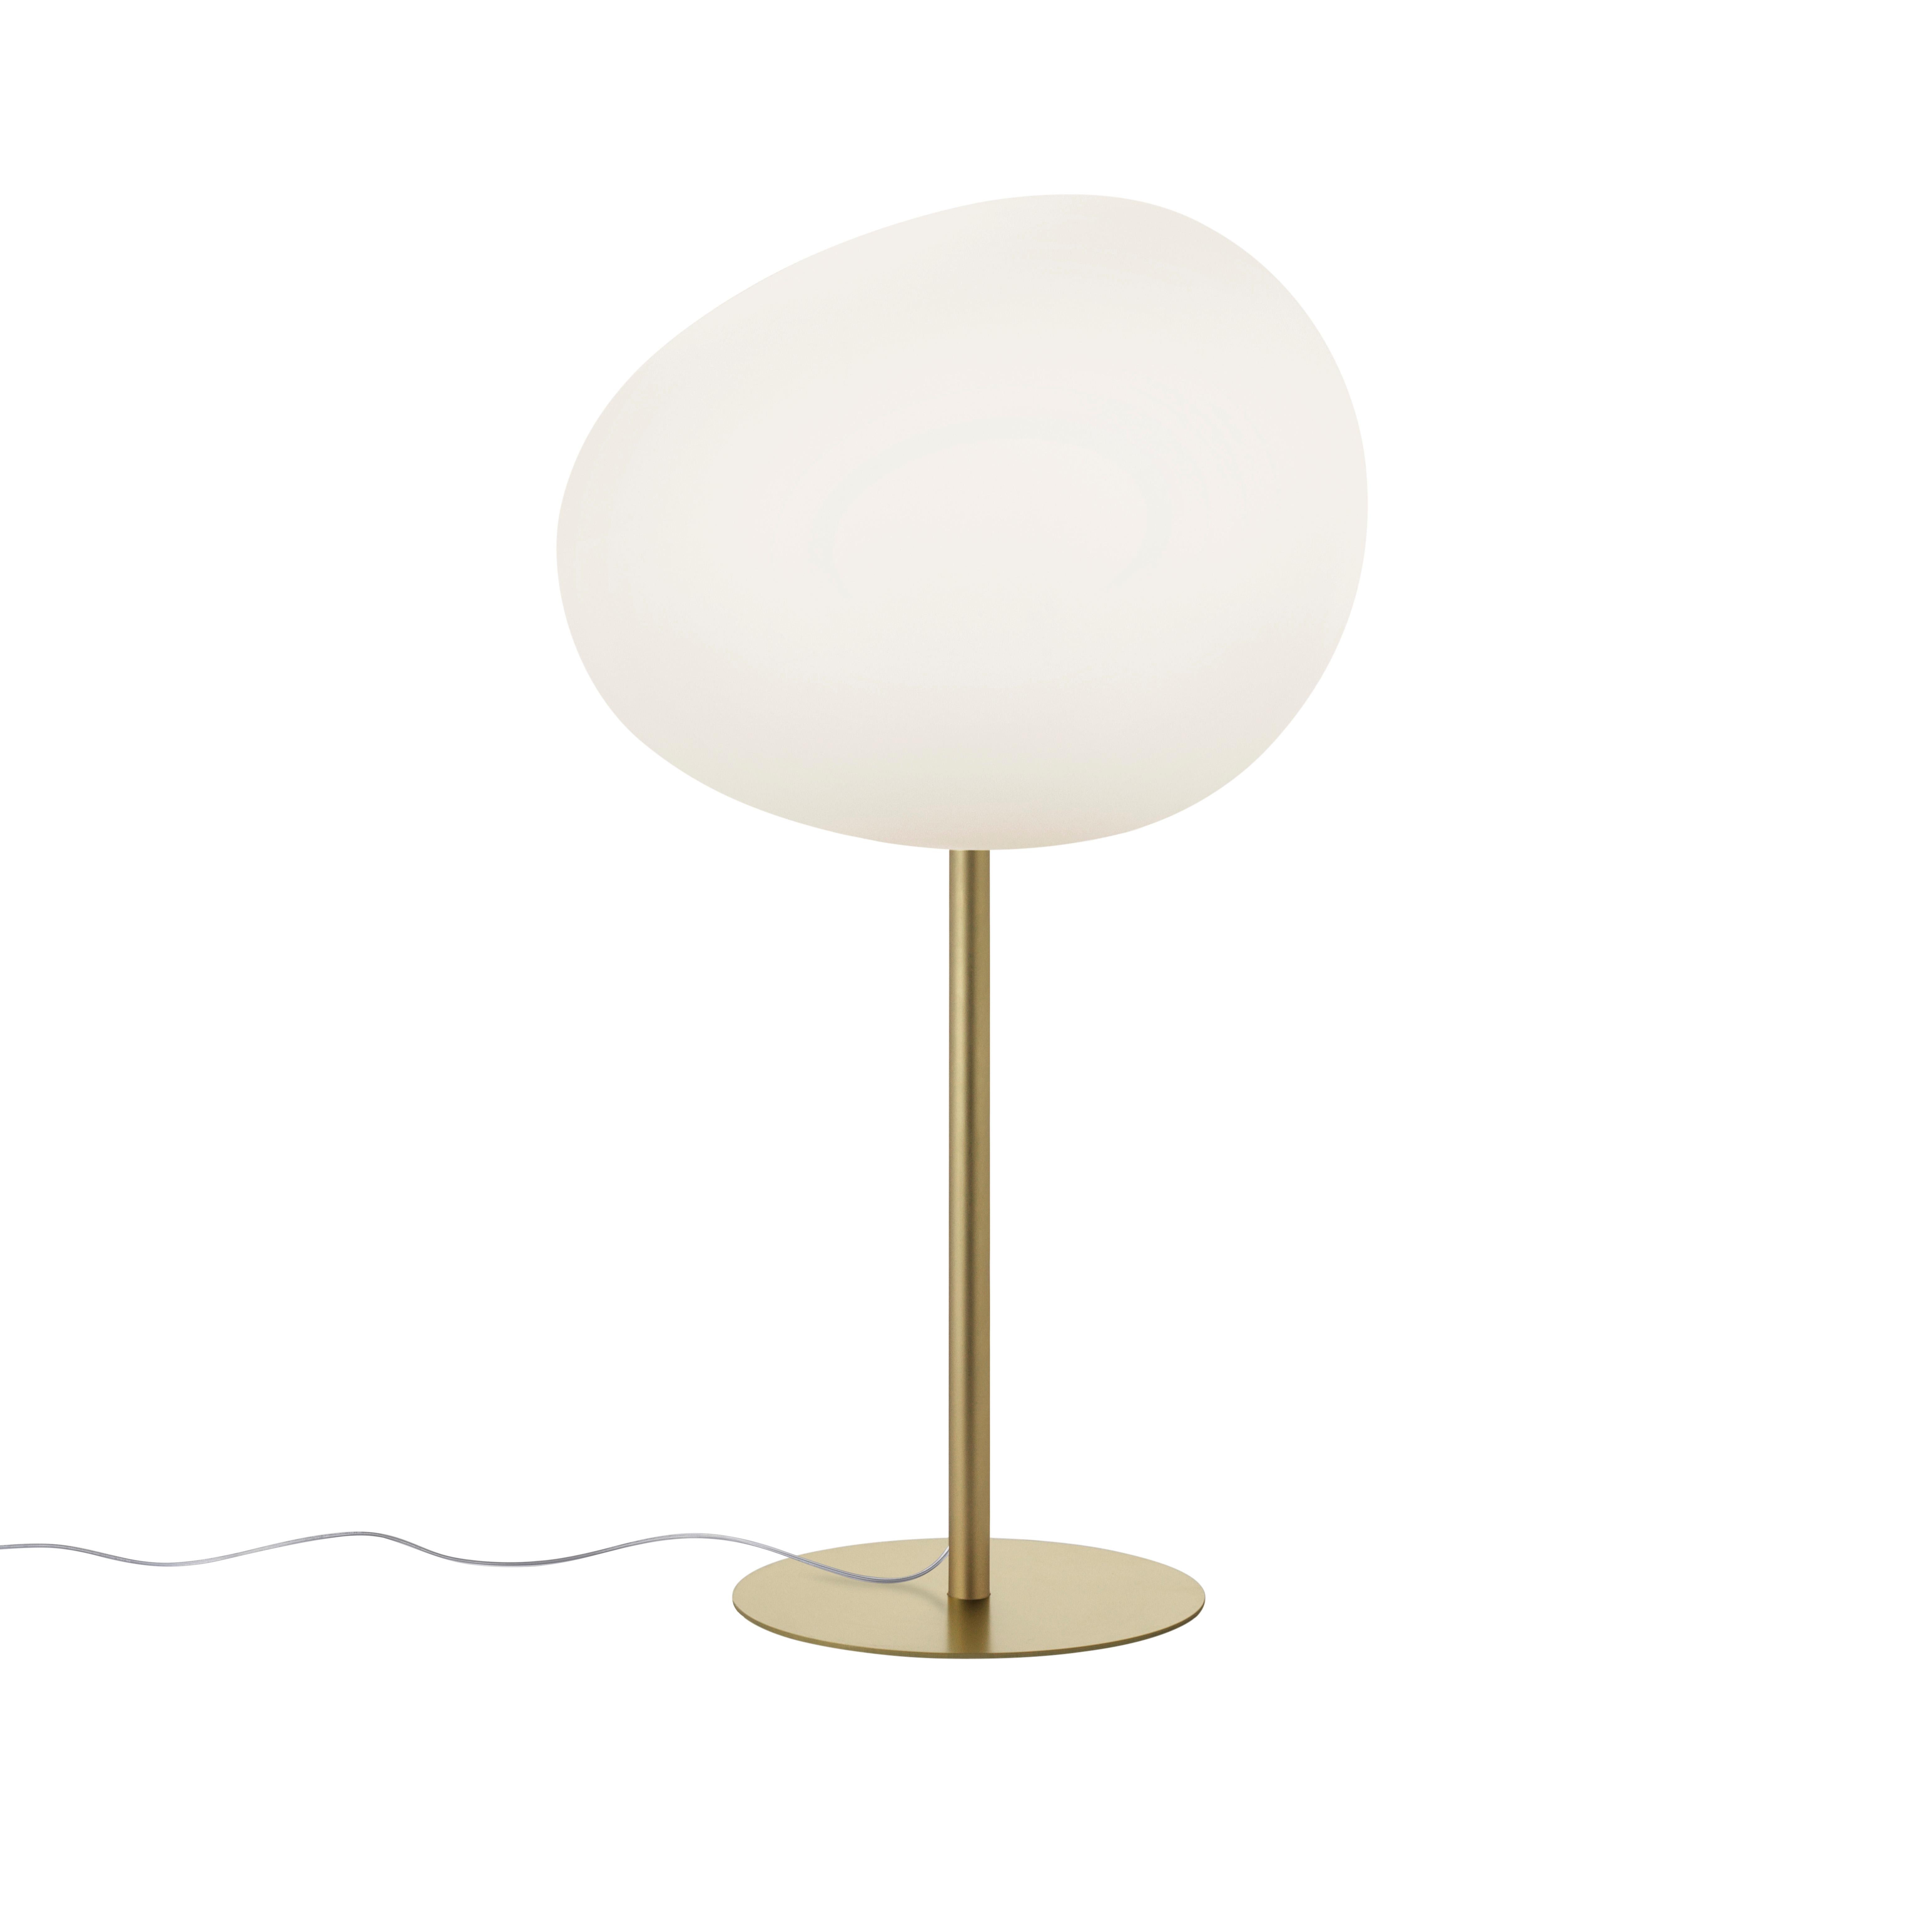 The Gregg table lamps have a delightful organic shape, like pebbles honed by a river, and they are made of hand-blown glass in various sizes.

Materials:
Blown satin glass and lacquered metal.

Light source:
Halo 1x 20W G9.

Color:
White.